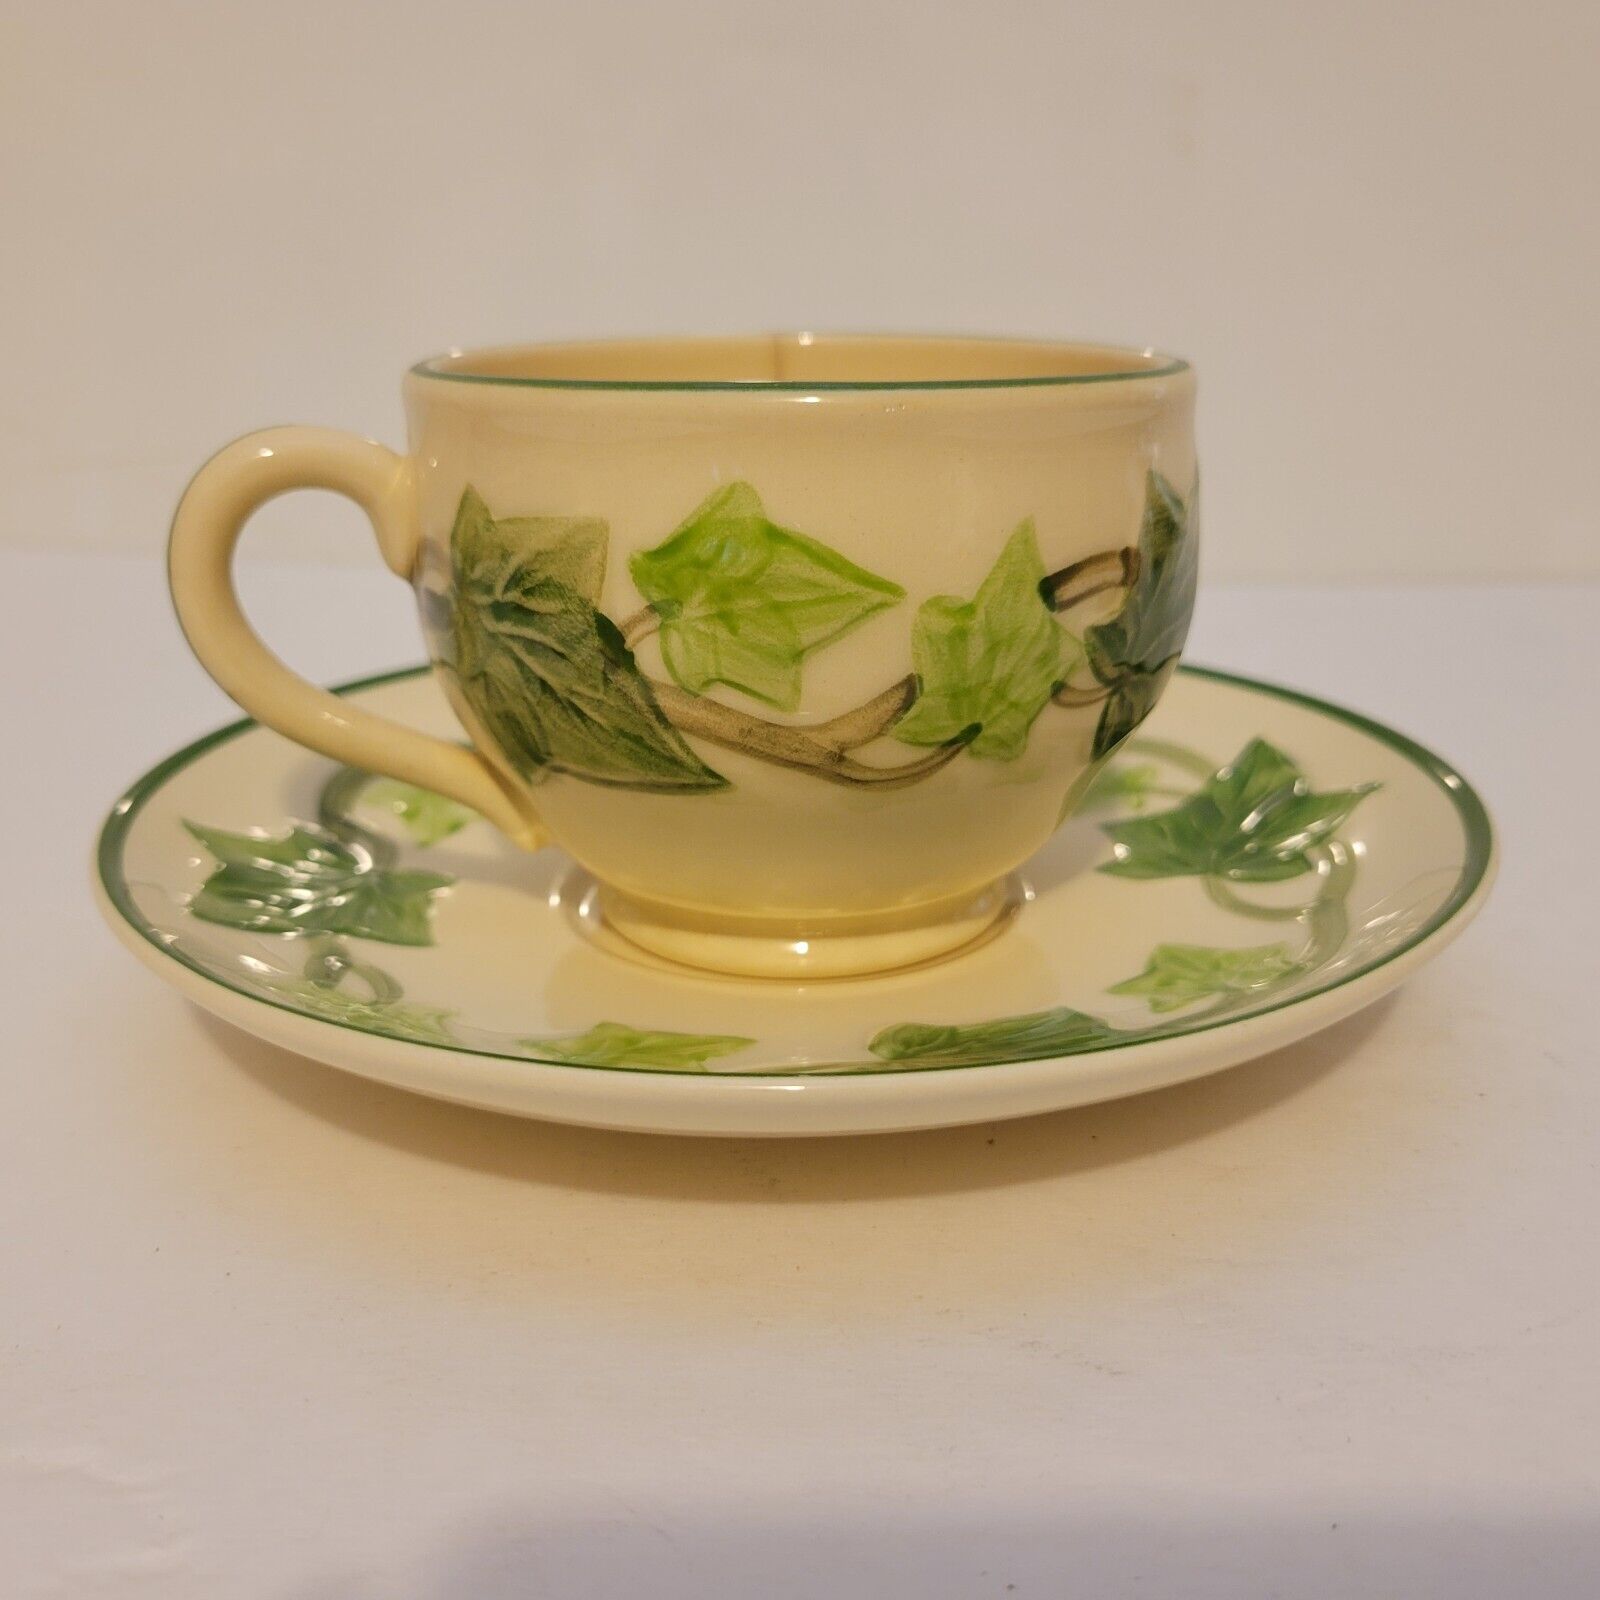 Vintage Franciscan IVY Coffee Cup & Saucer Made in USA